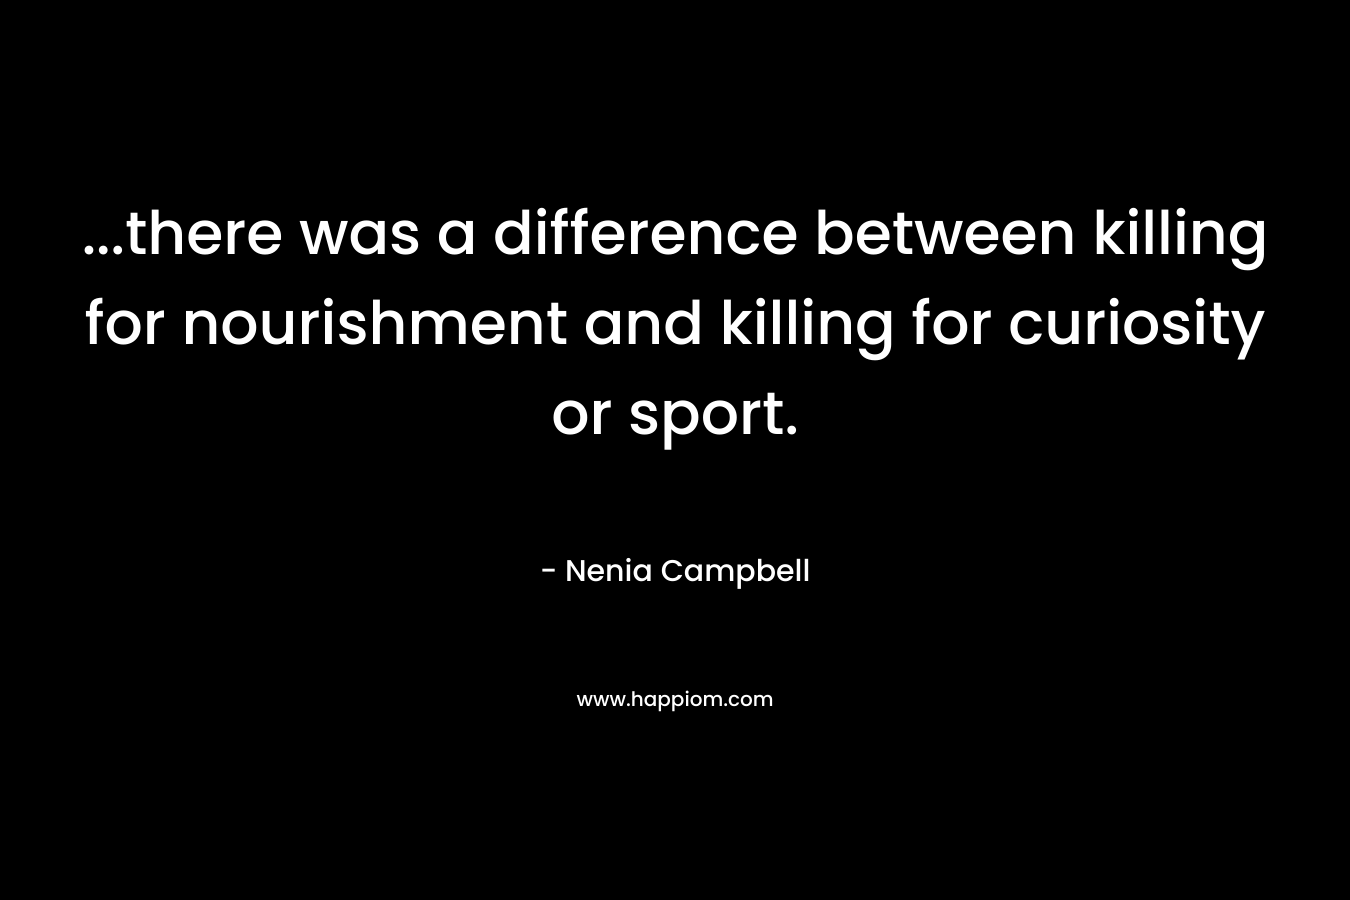 ...there was a difference between killing for nourishment and killing for curiosity or sport.